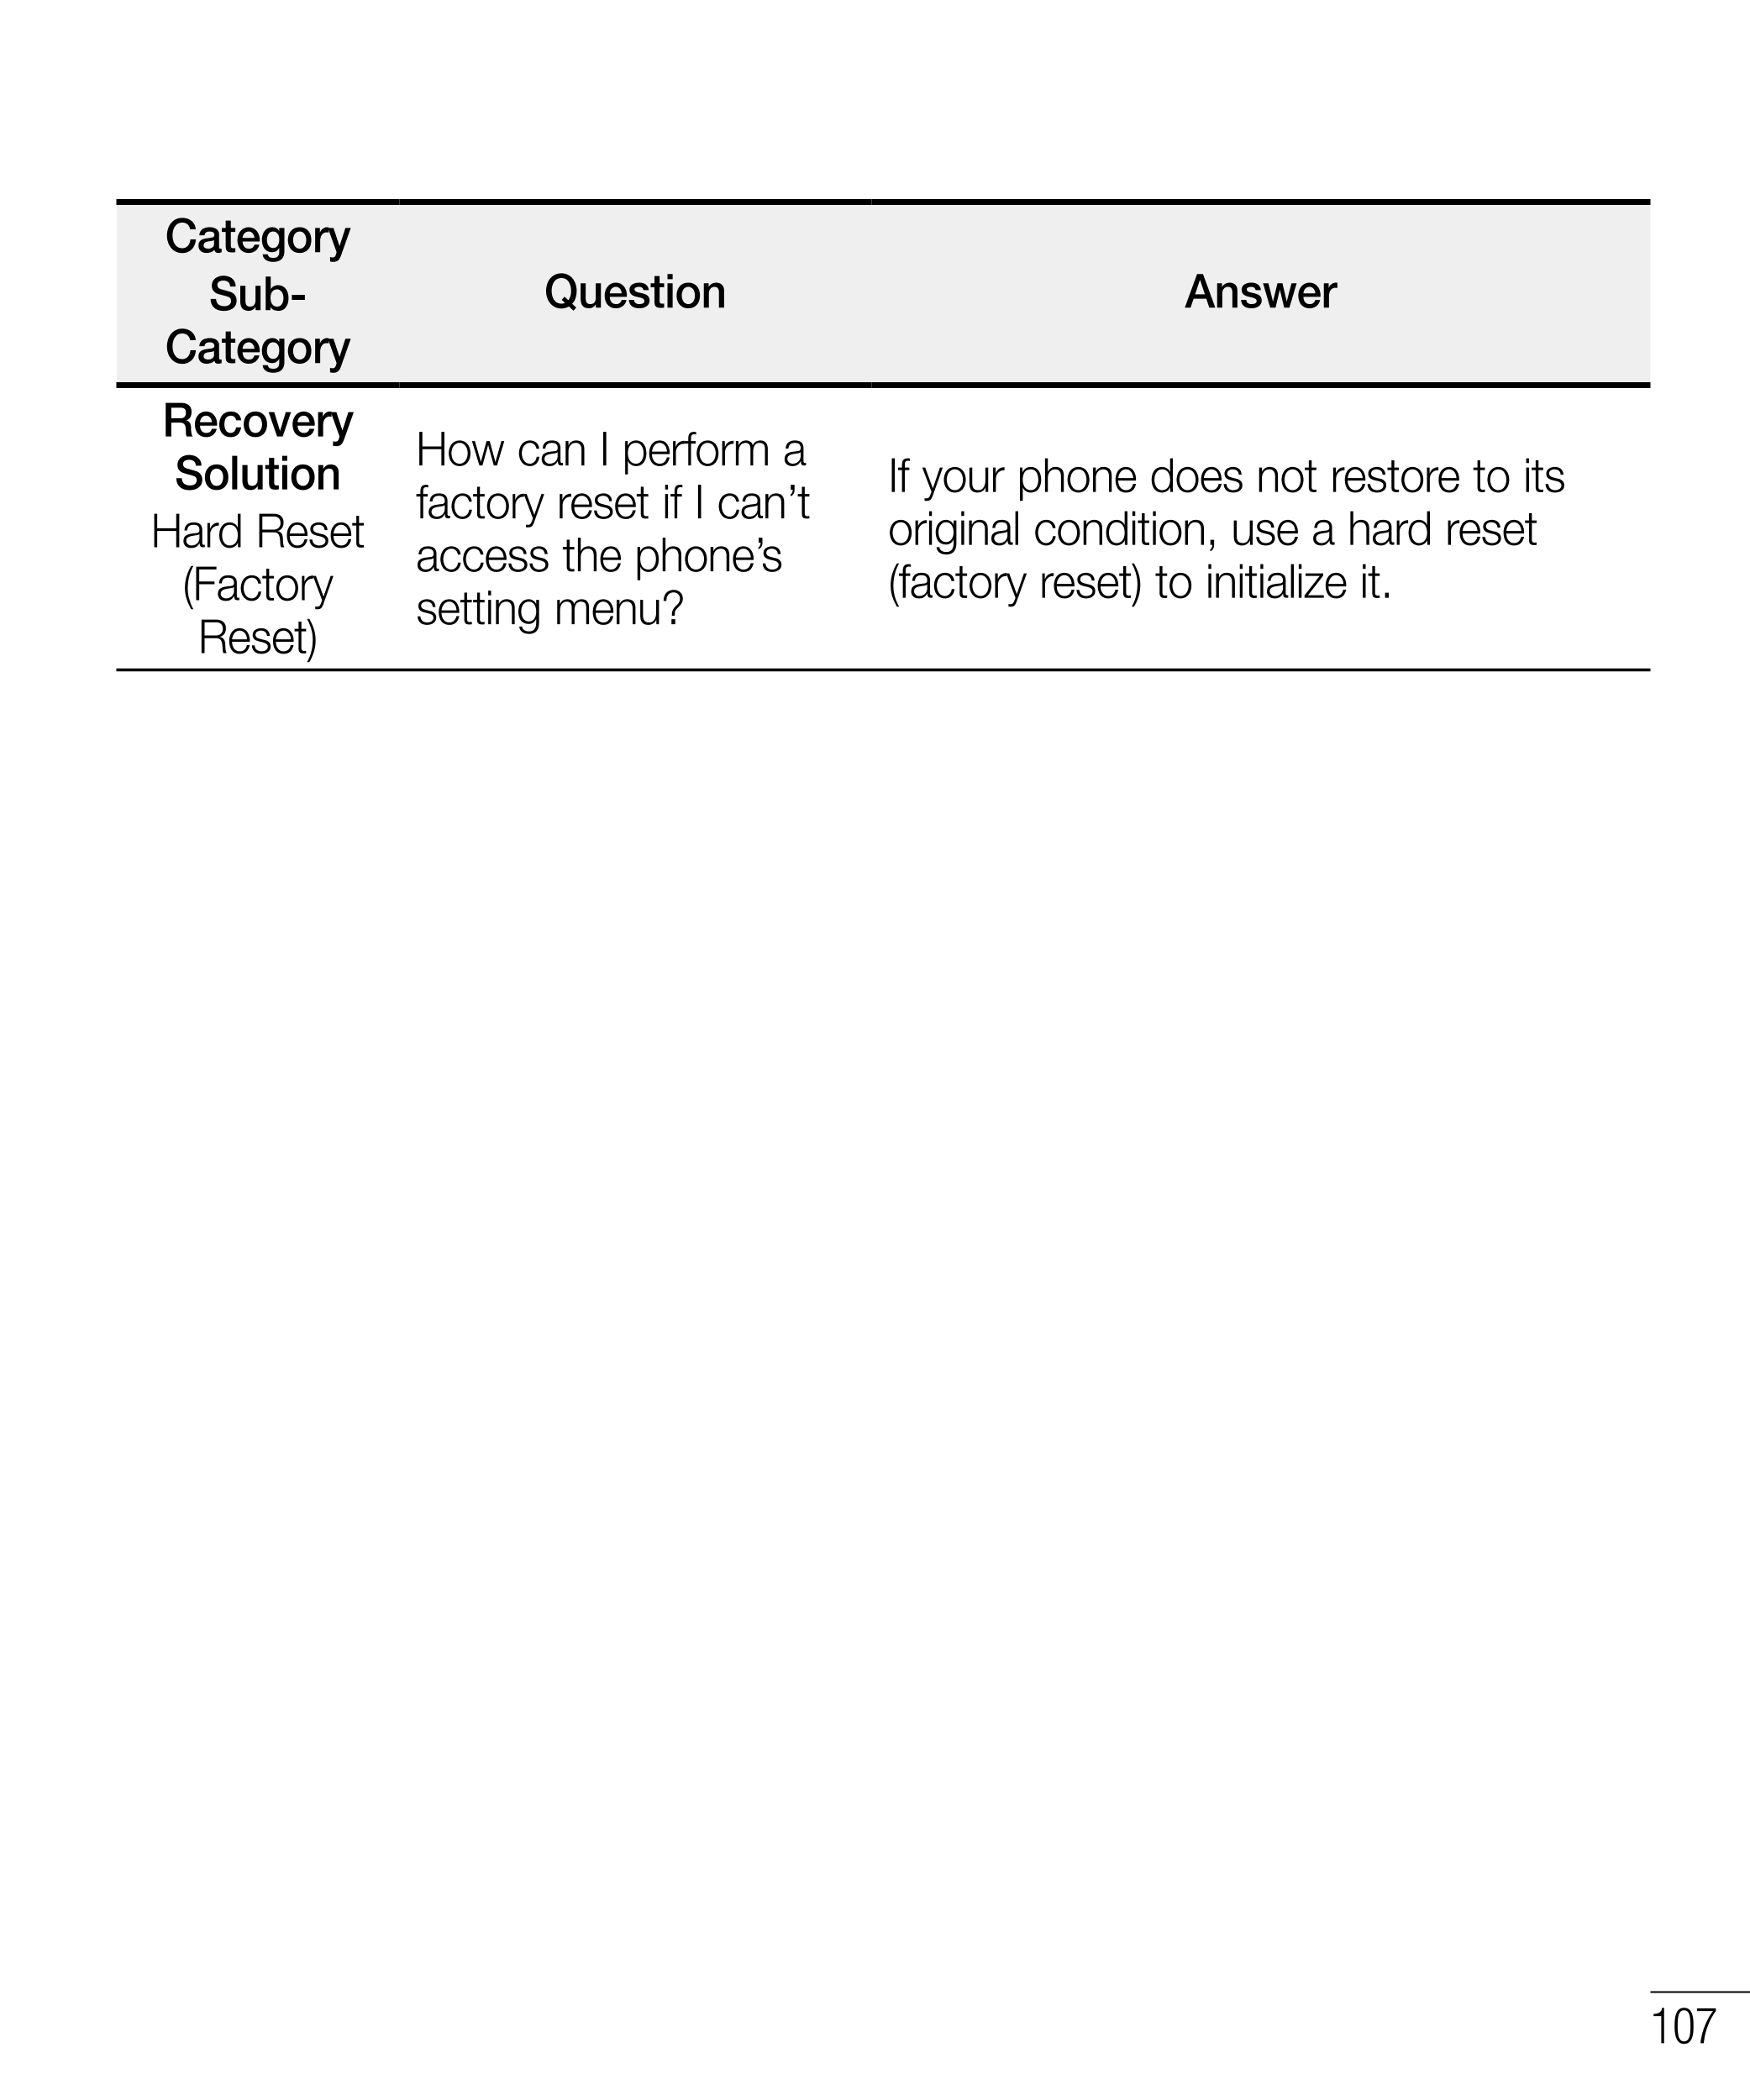 Category
Sub- Question                                    Answer
Category
Recovery 
Solution How can I perform a  If your phone 